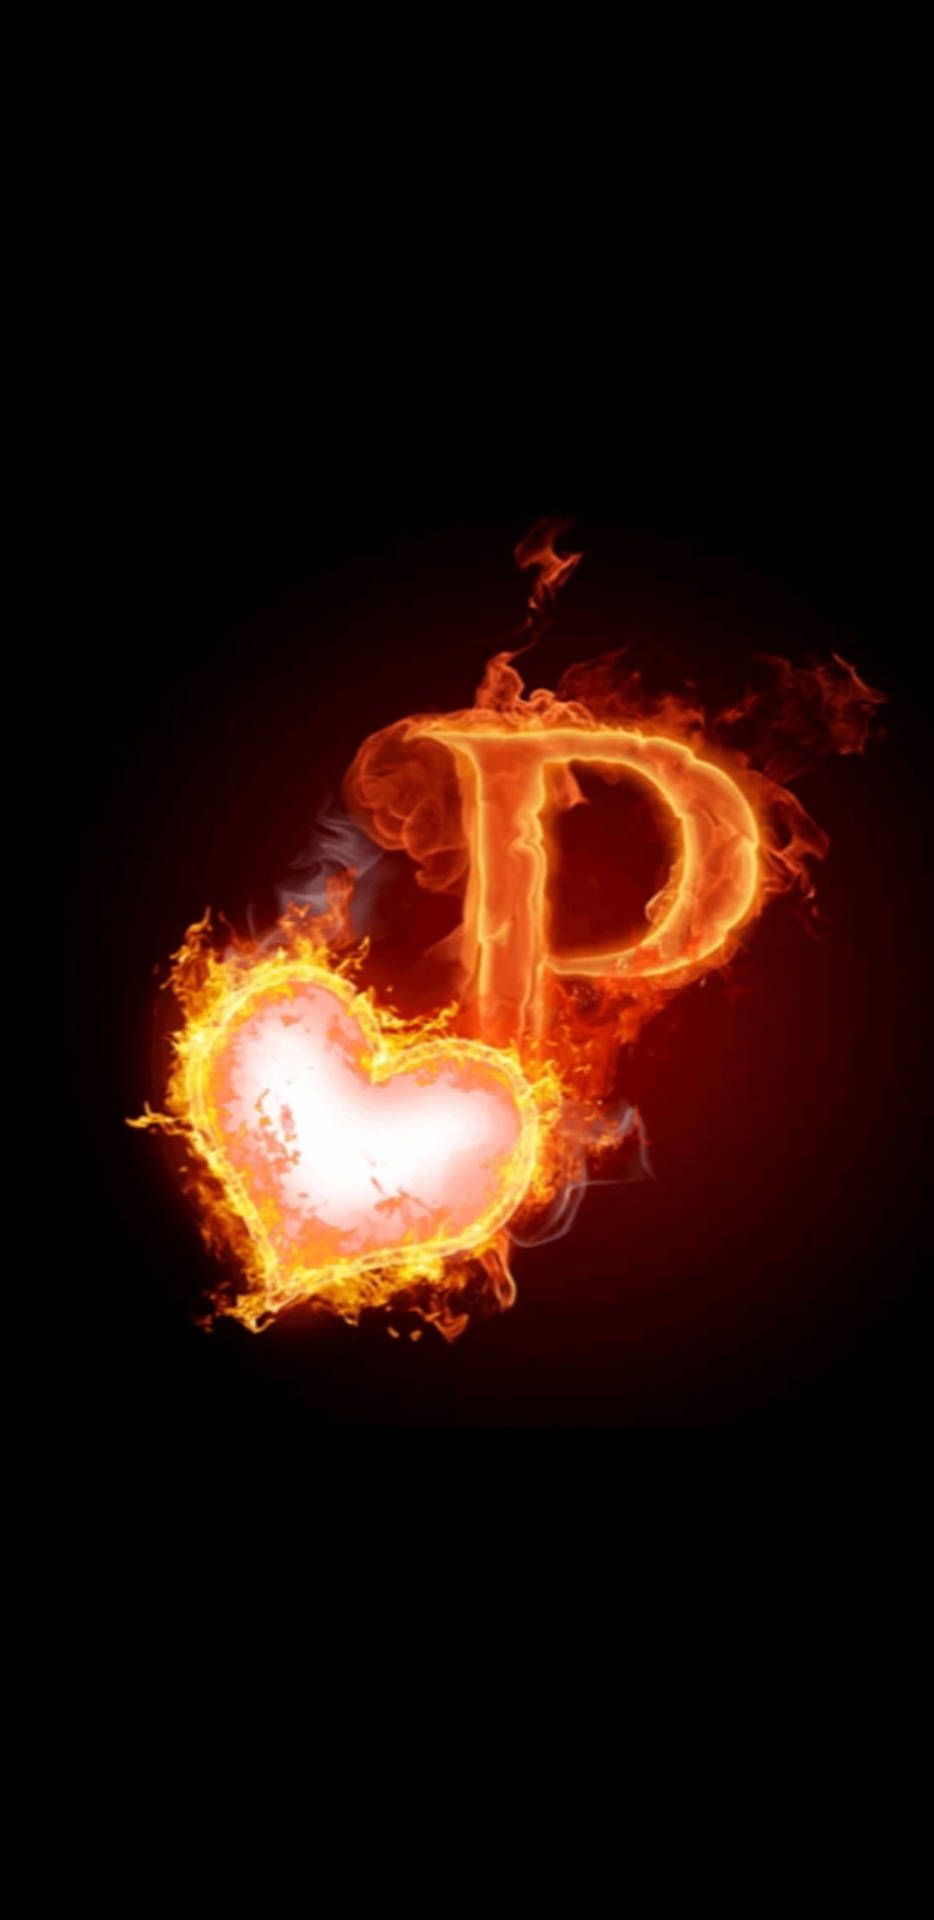 Burning Heart Wallpapers - Top Free Burning Heart Backgrounds ...